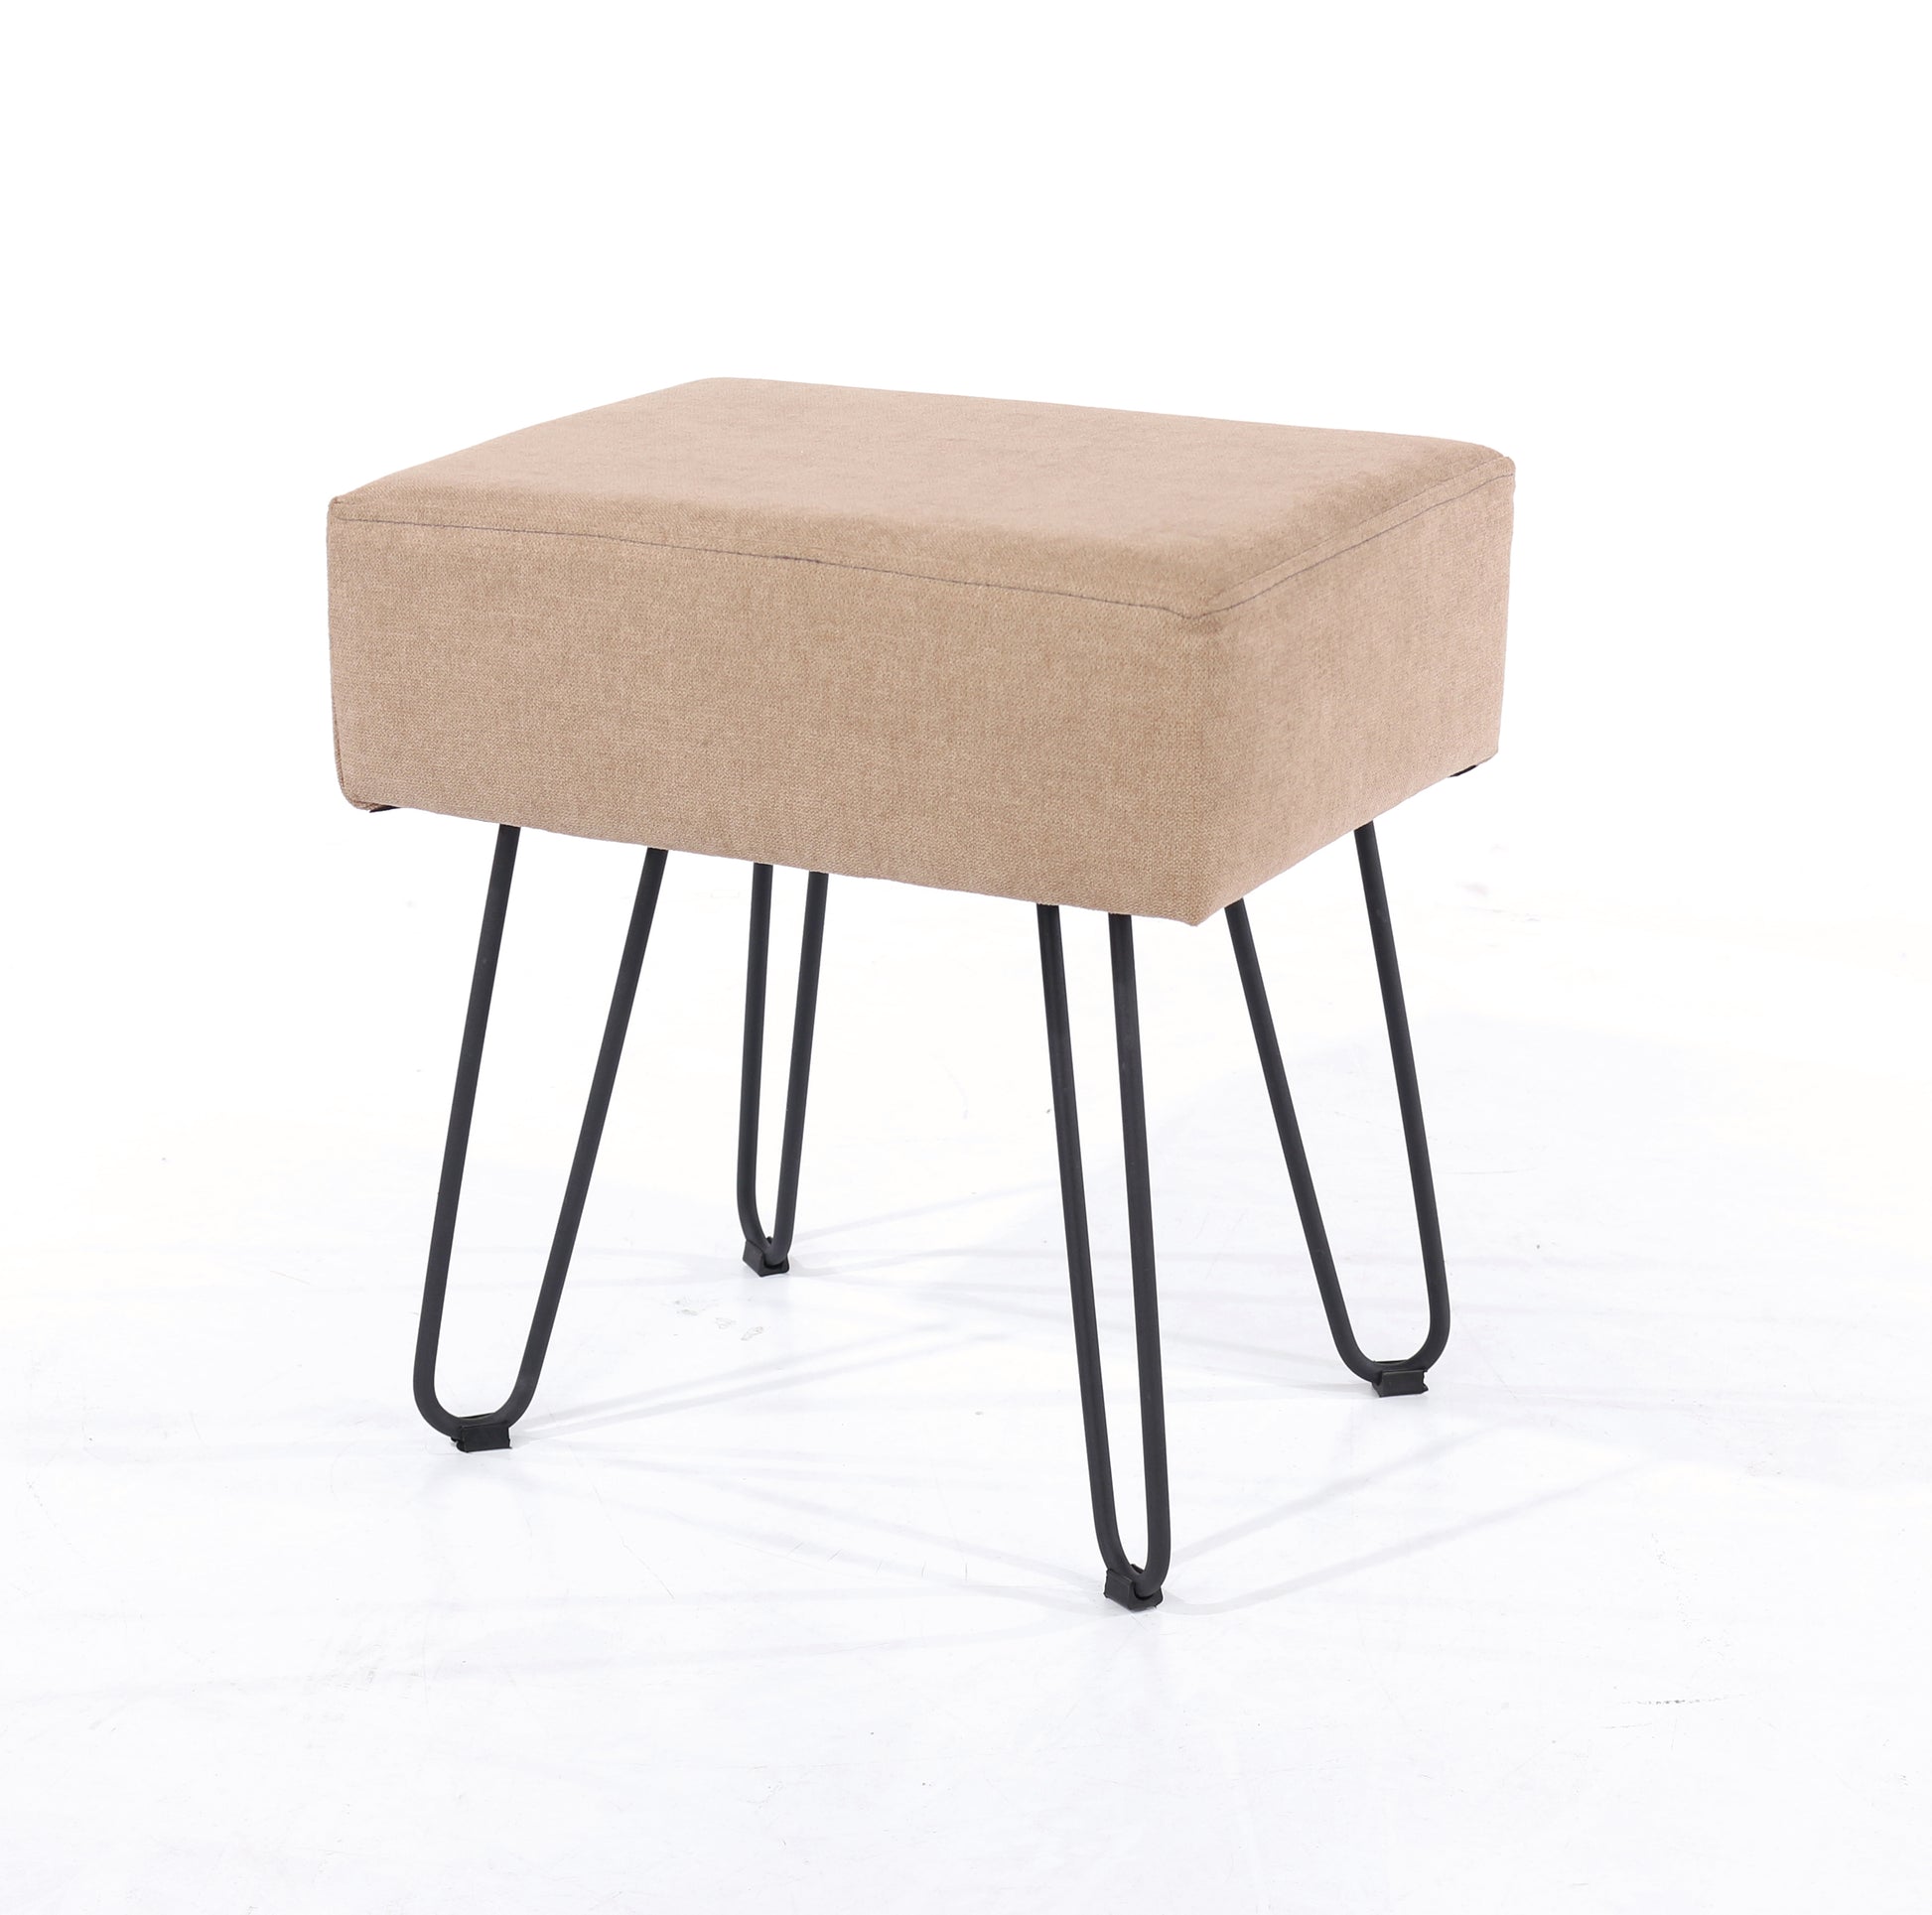 Accessories sand fabric upholstered stool with black metal legs